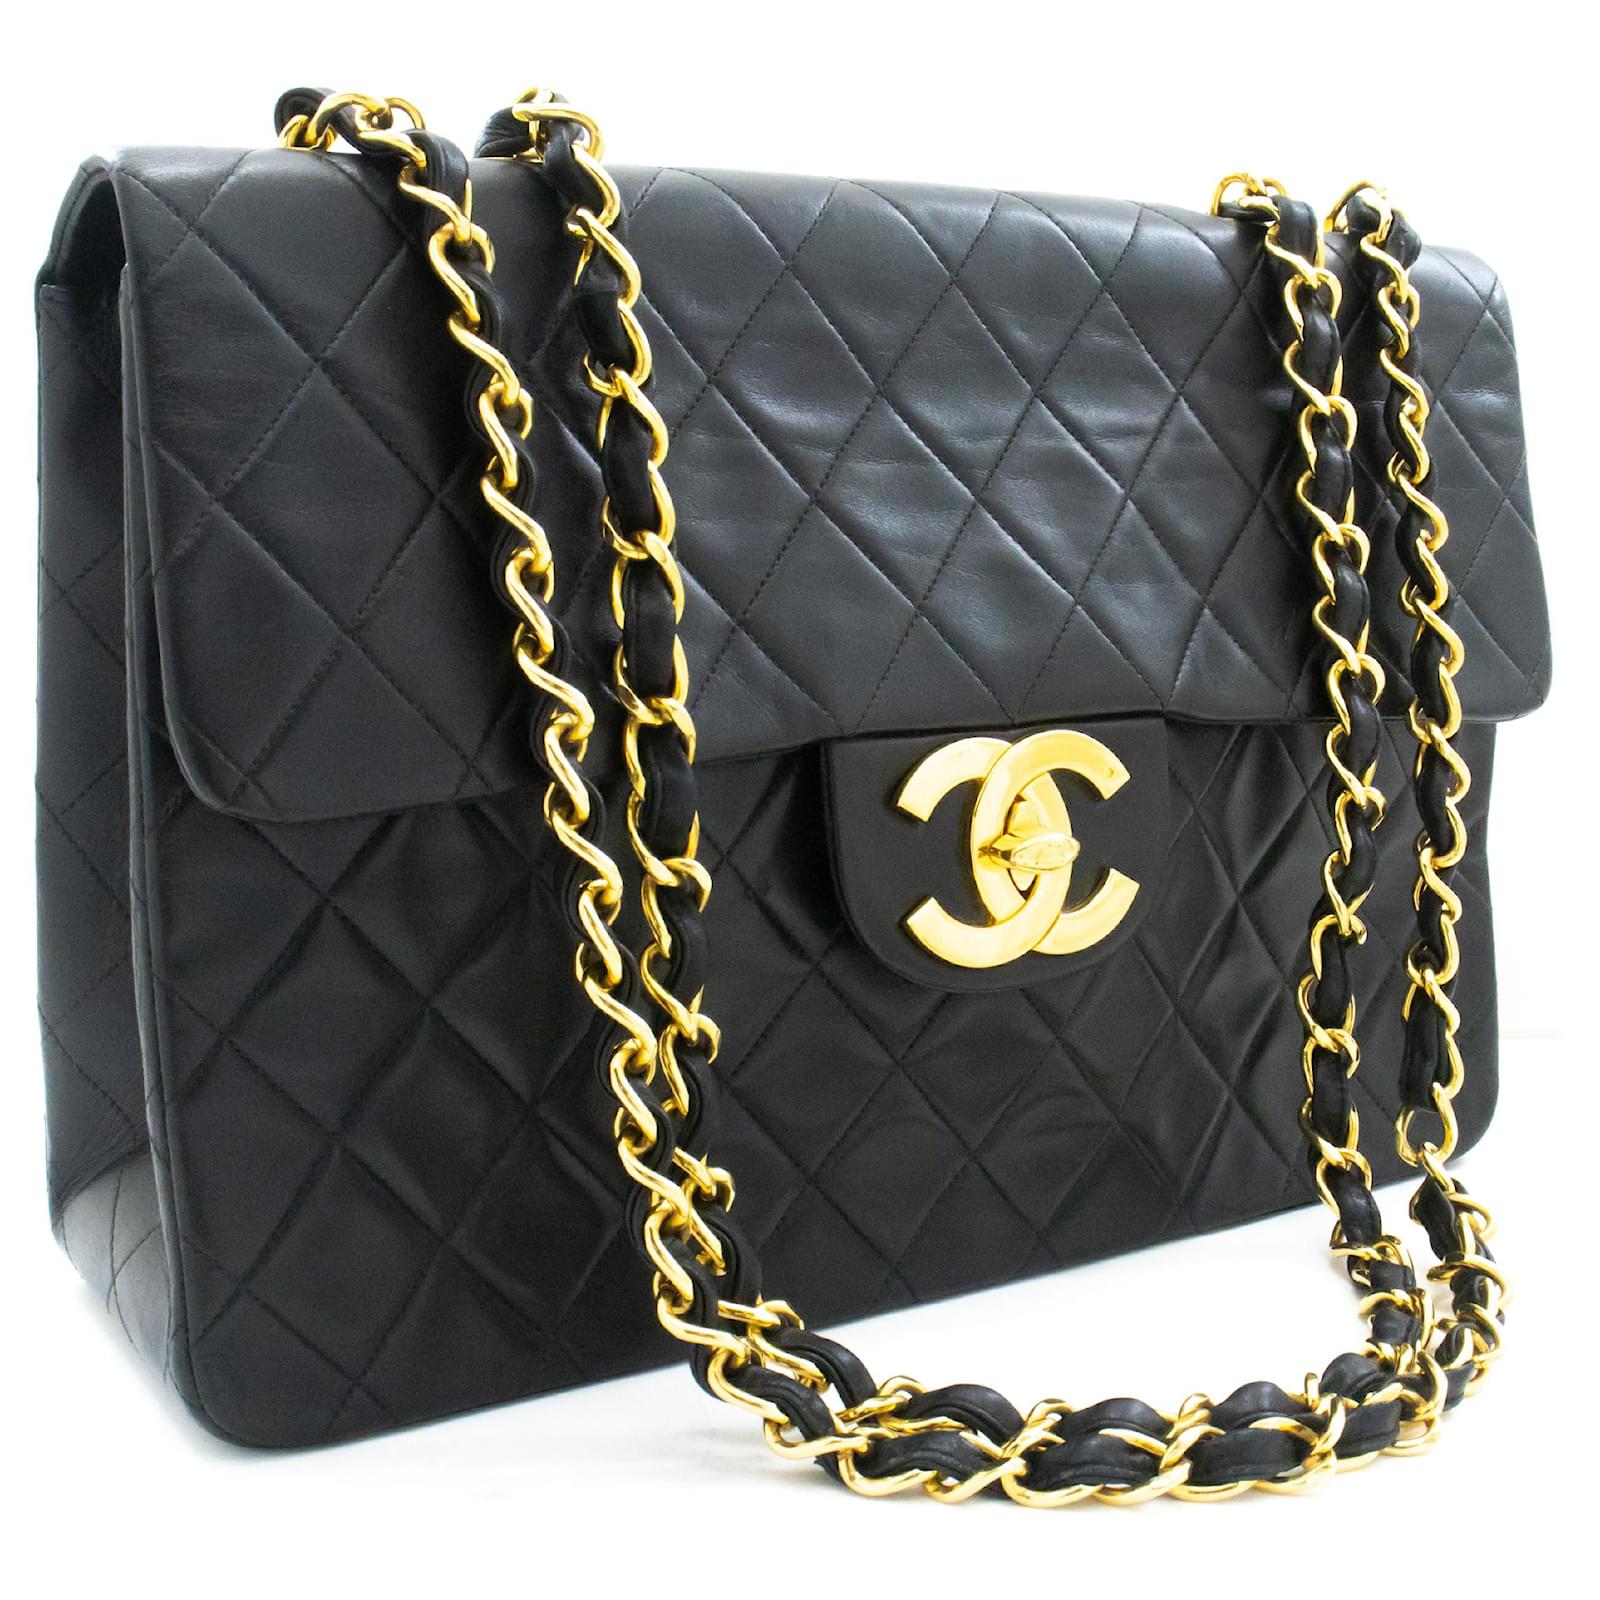 Chanel Large Classic Tote